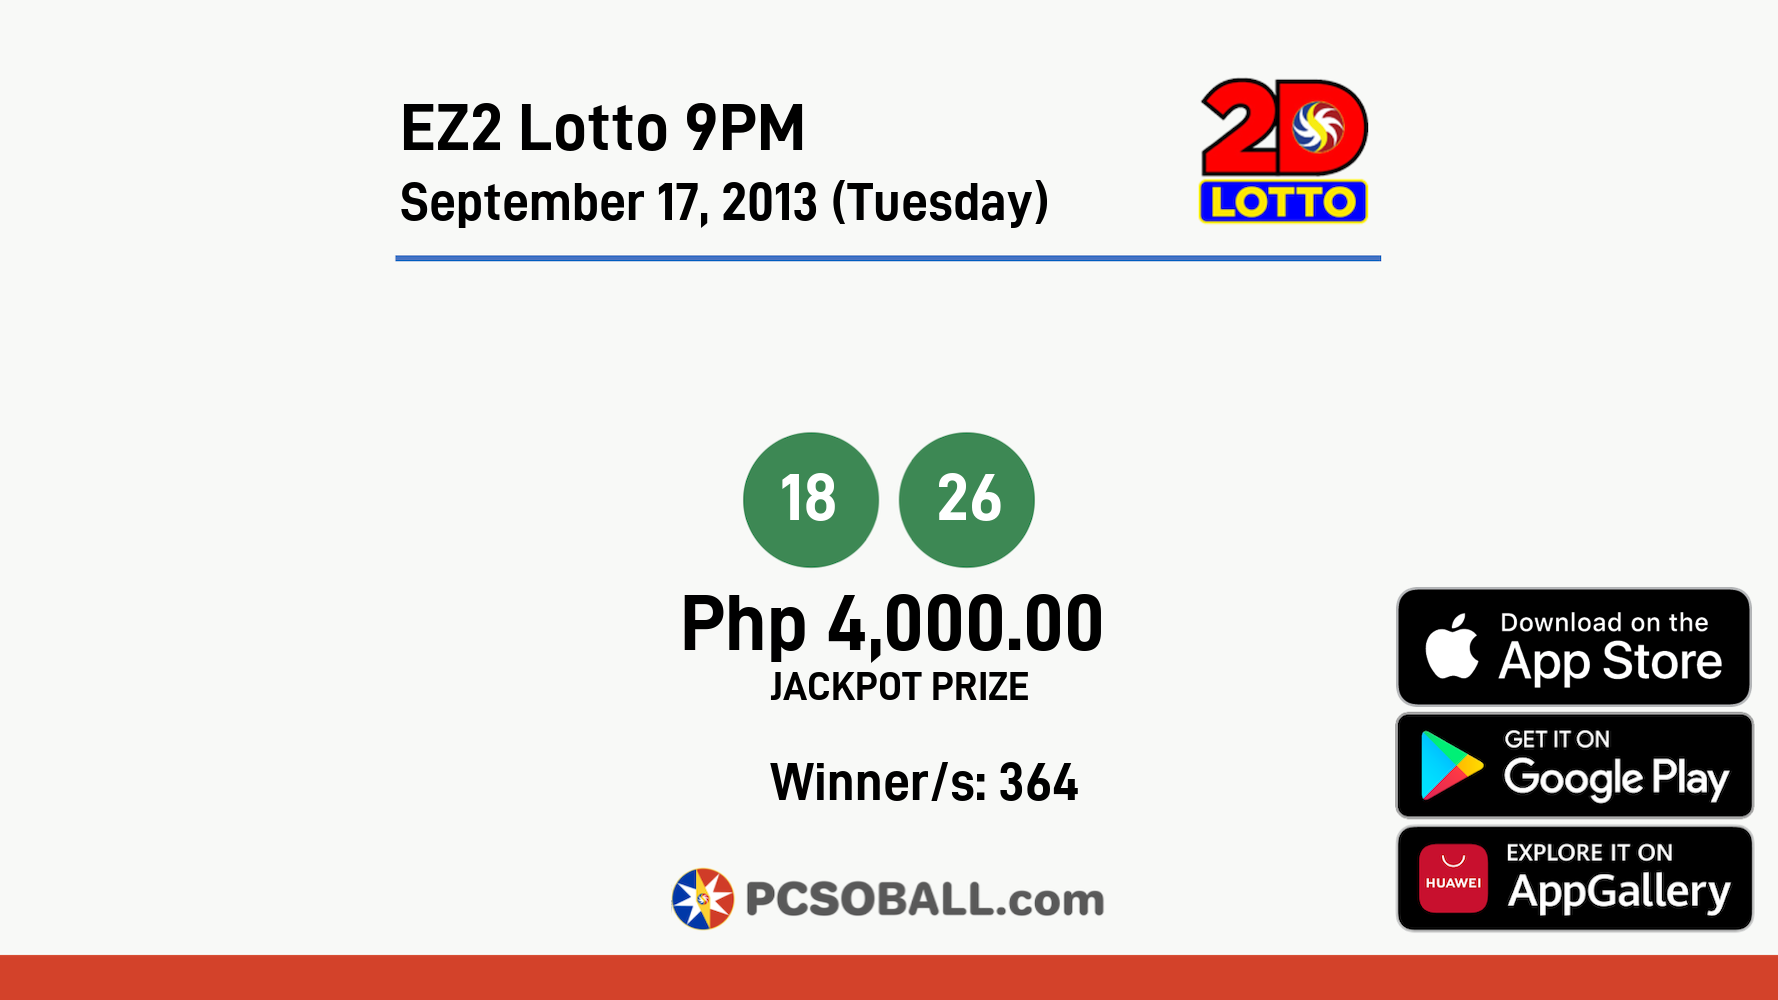 EZ2 Lotto 9PM September 17, 2013 (Tuesday) Result